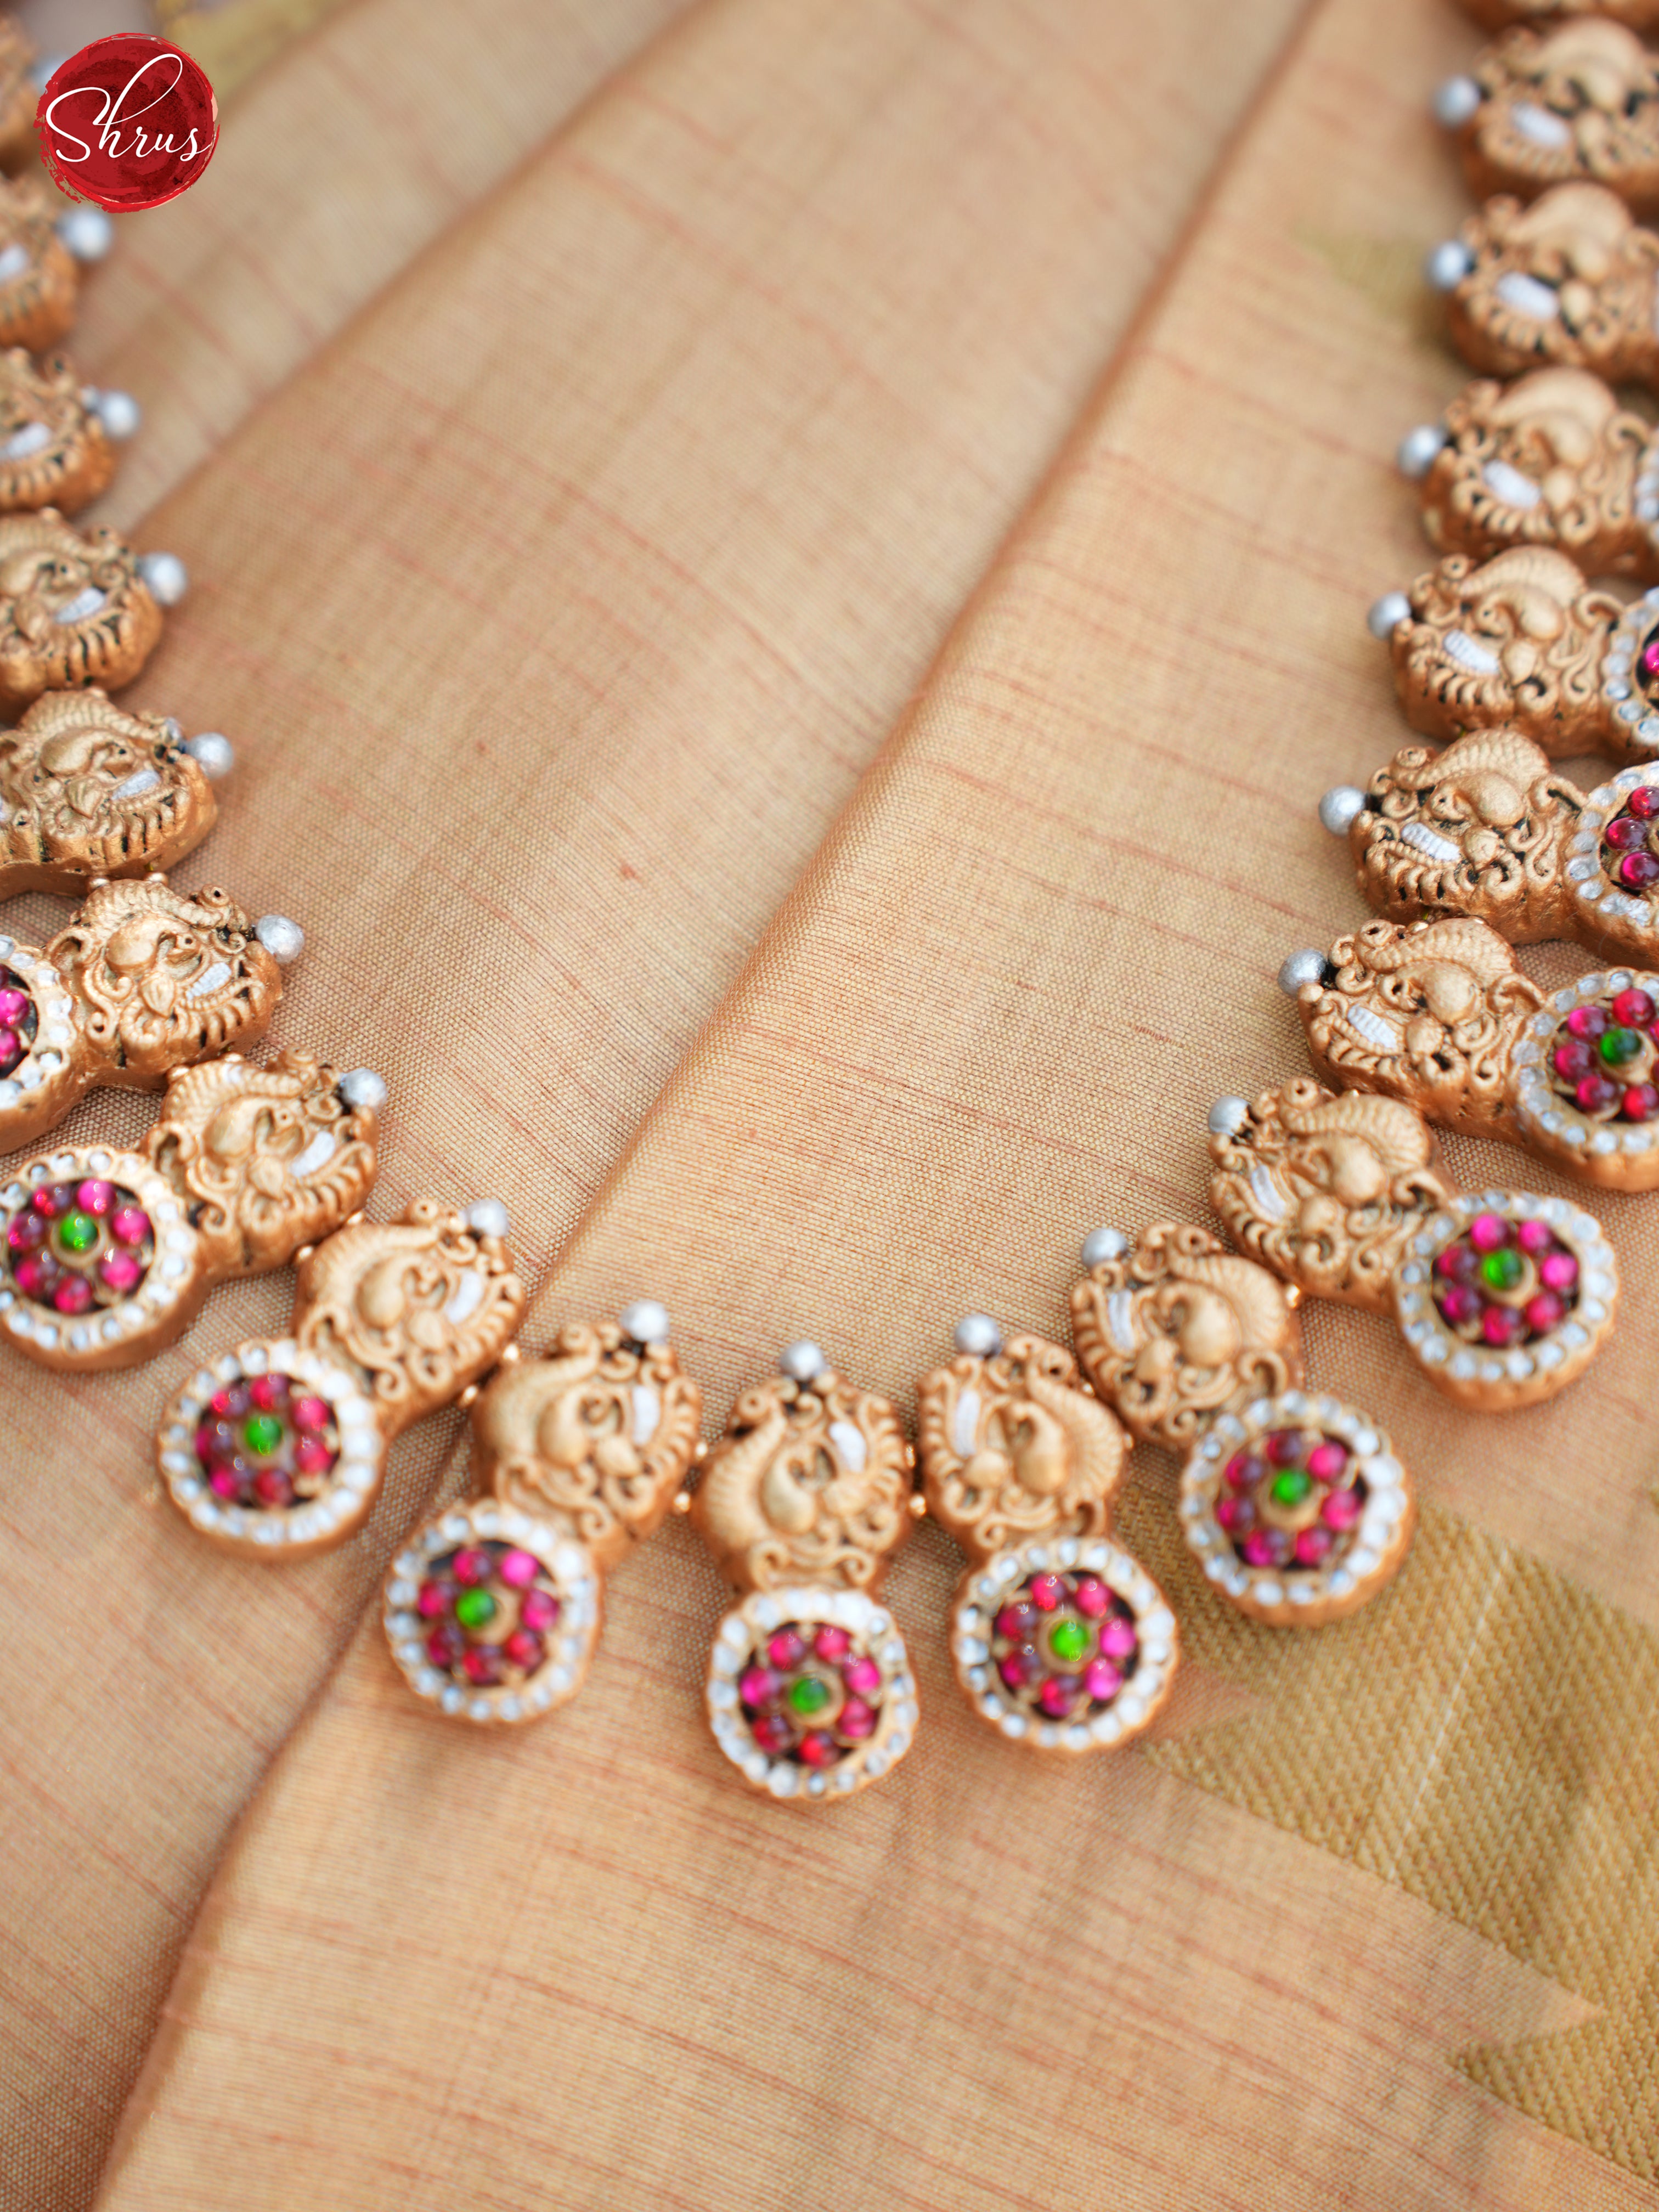 Handcrafted peacock terracotta necklace with jhumka- Accessories - Shop on ShrusEternity.com